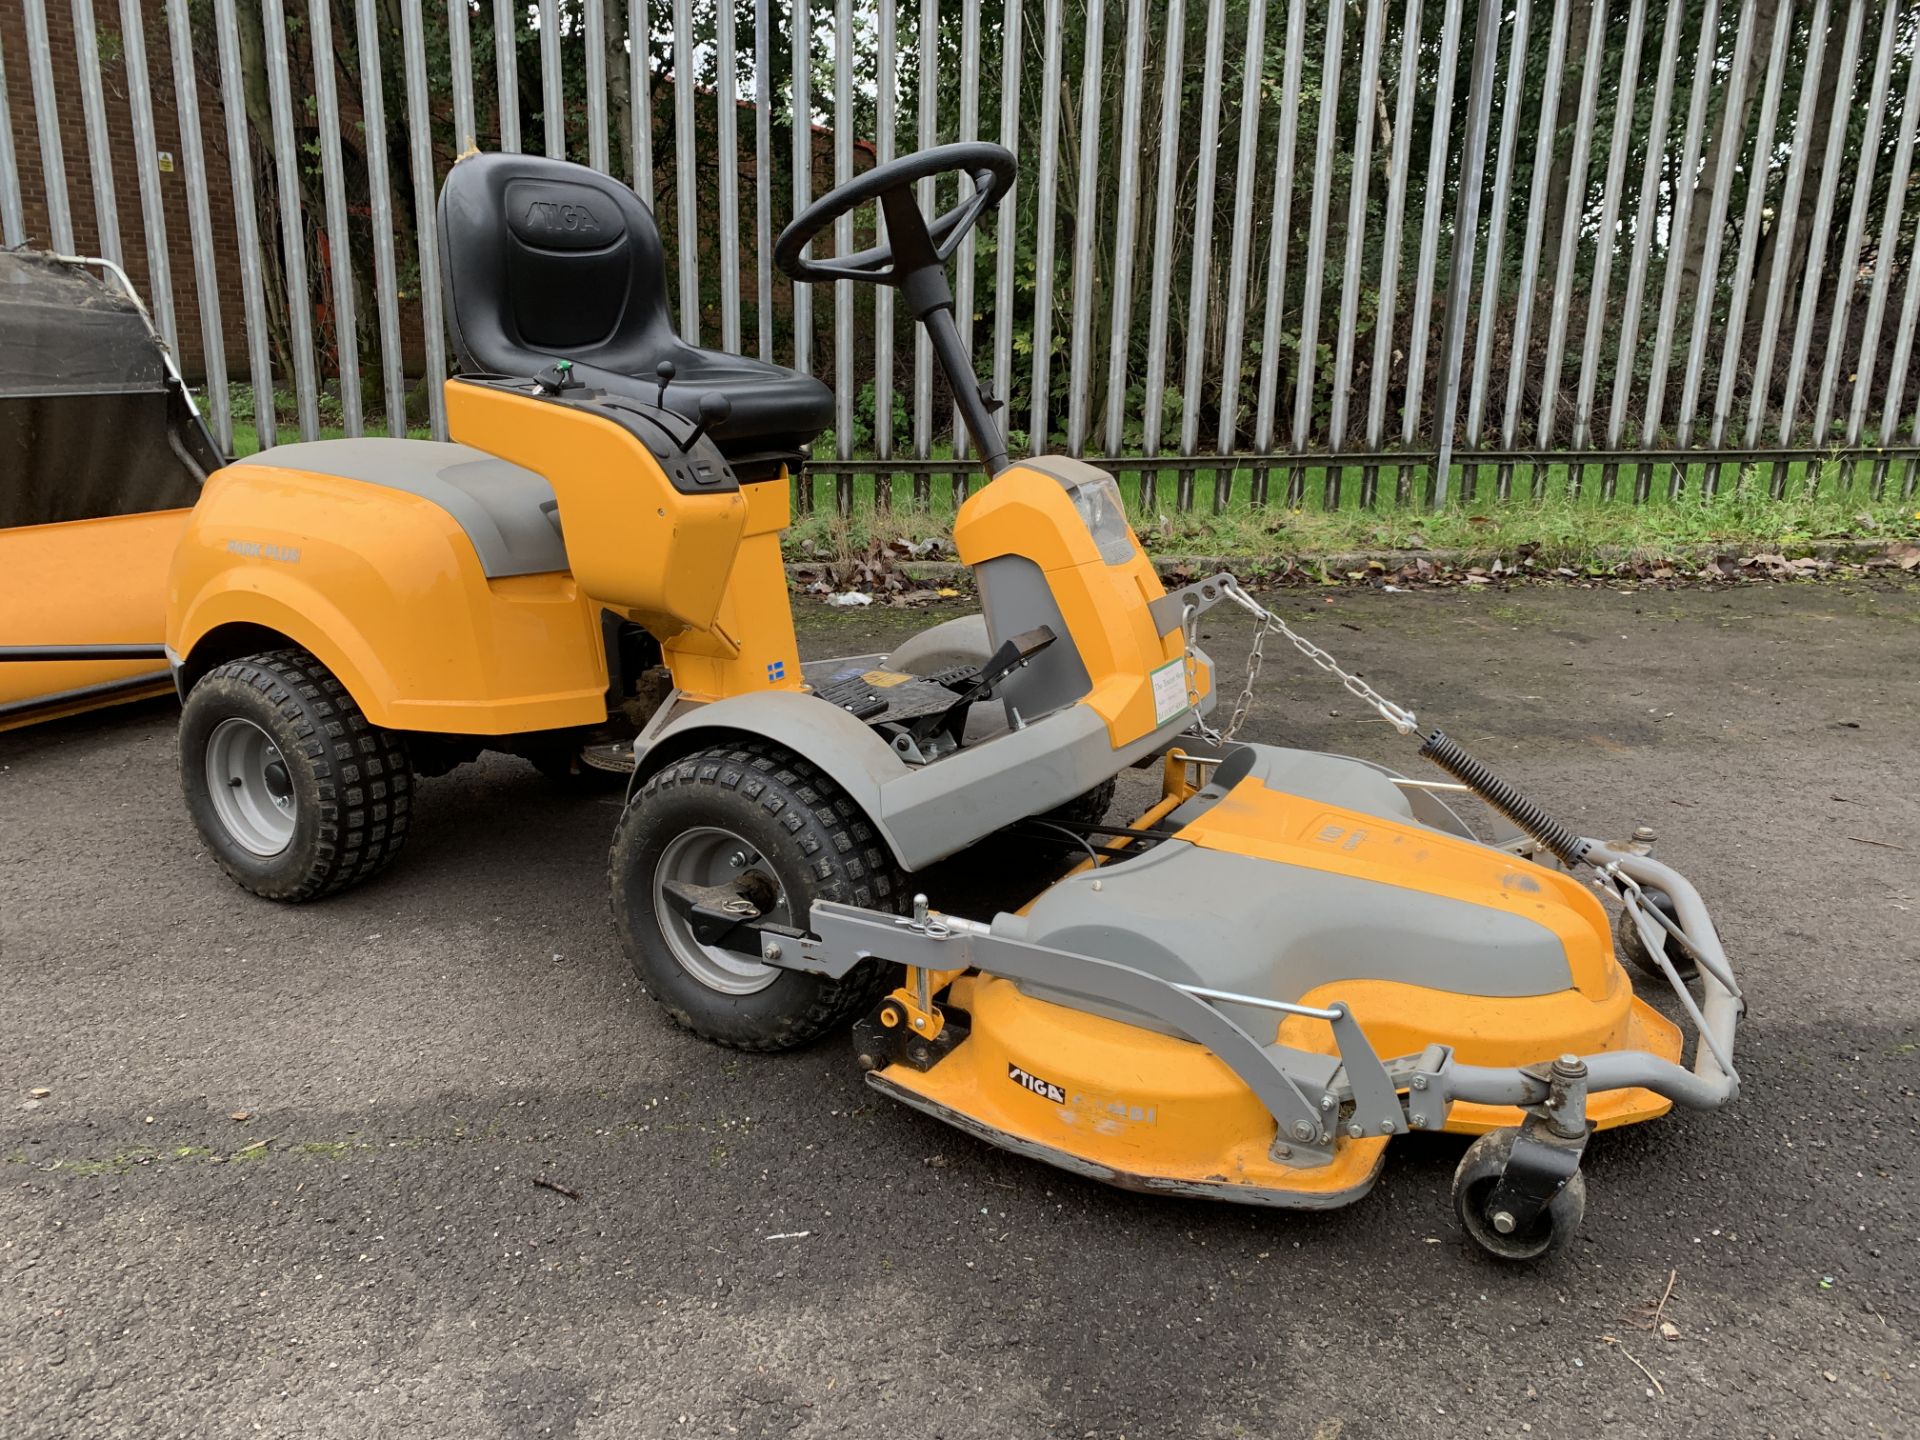 Stiga Combi Park Plus Ride-On Mower with 100 Combi 3 Deck and a 42" Grass & Leaf Collector. - Image 2 of 12